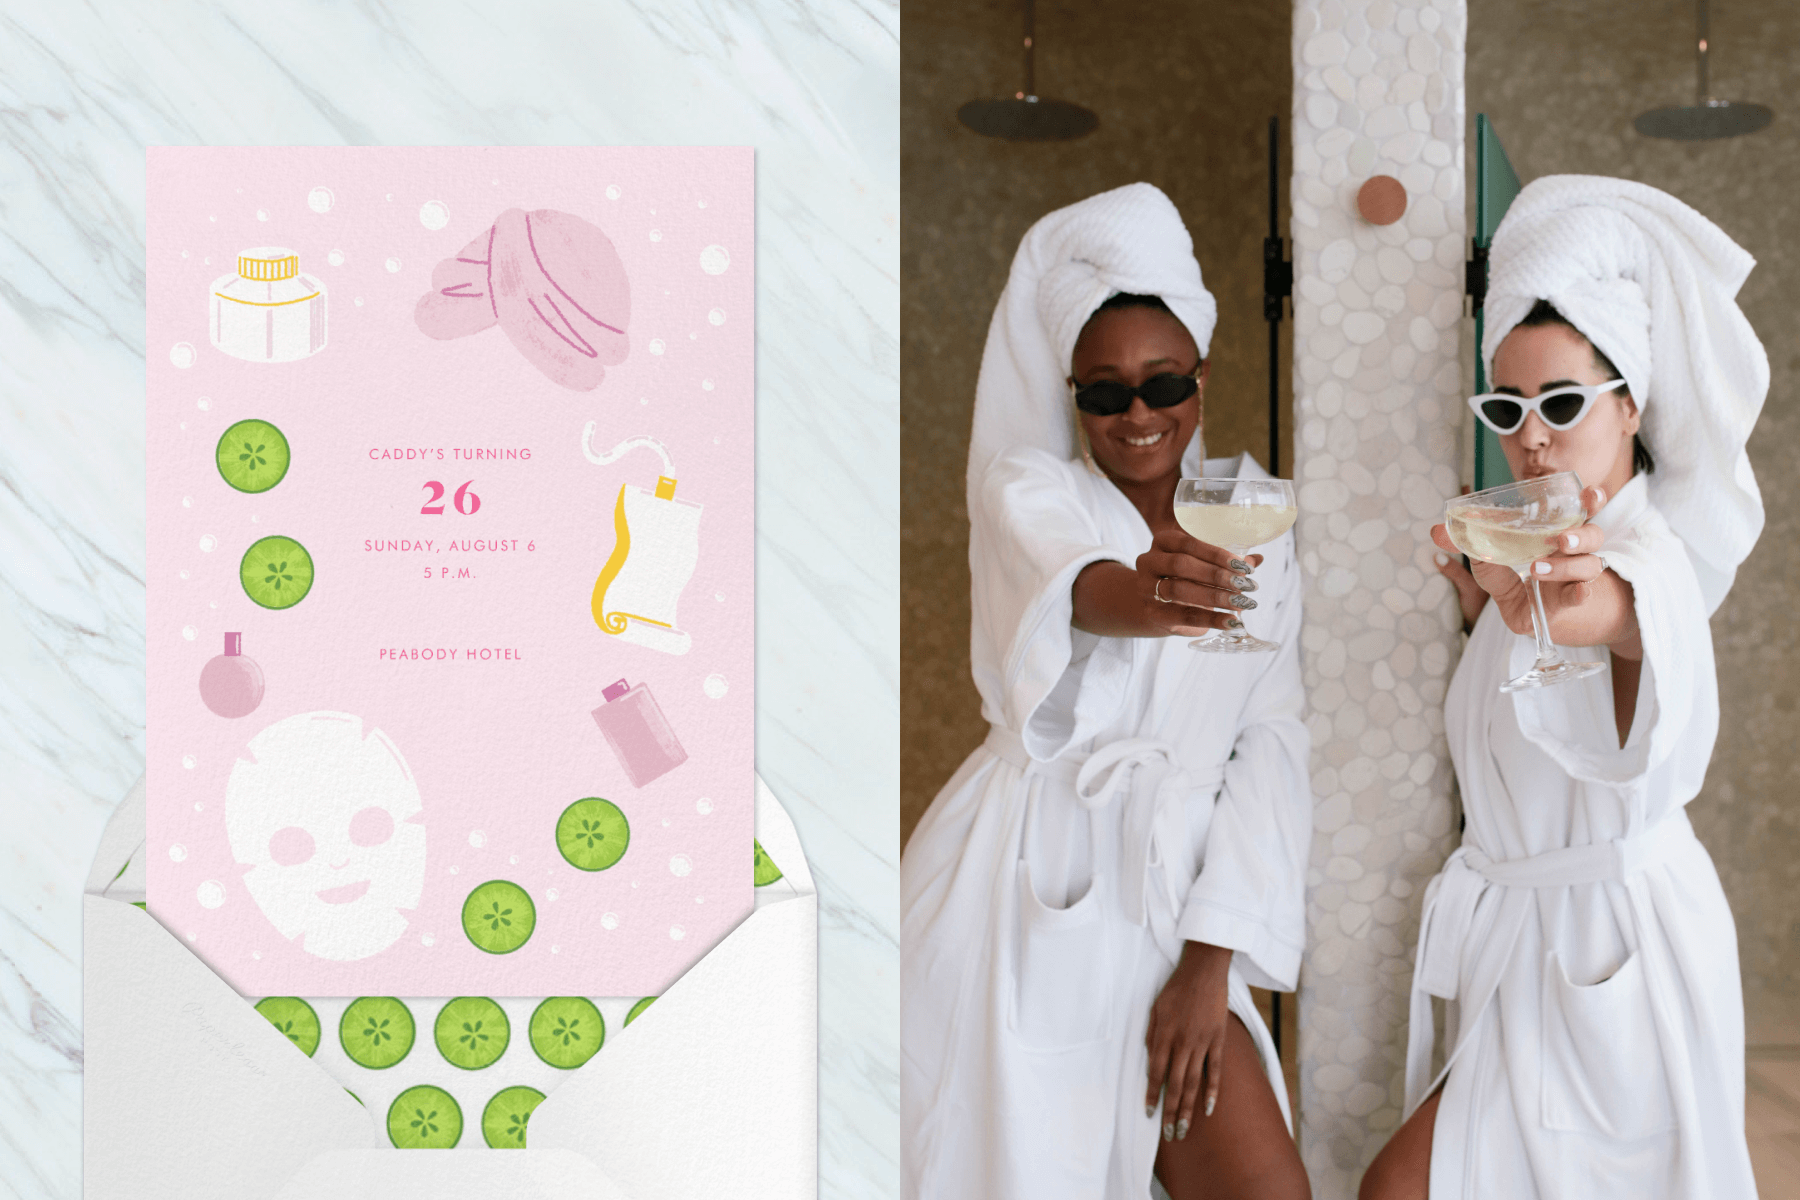 Left: A pink 26th birthday invitation with illustrations of spa items like a towel turban, cucumber slices, face mask, and lotion. Right: Two women wear white robes, hair towels, and sunglasses posing with coupe glasses in front of side-by-side showers.